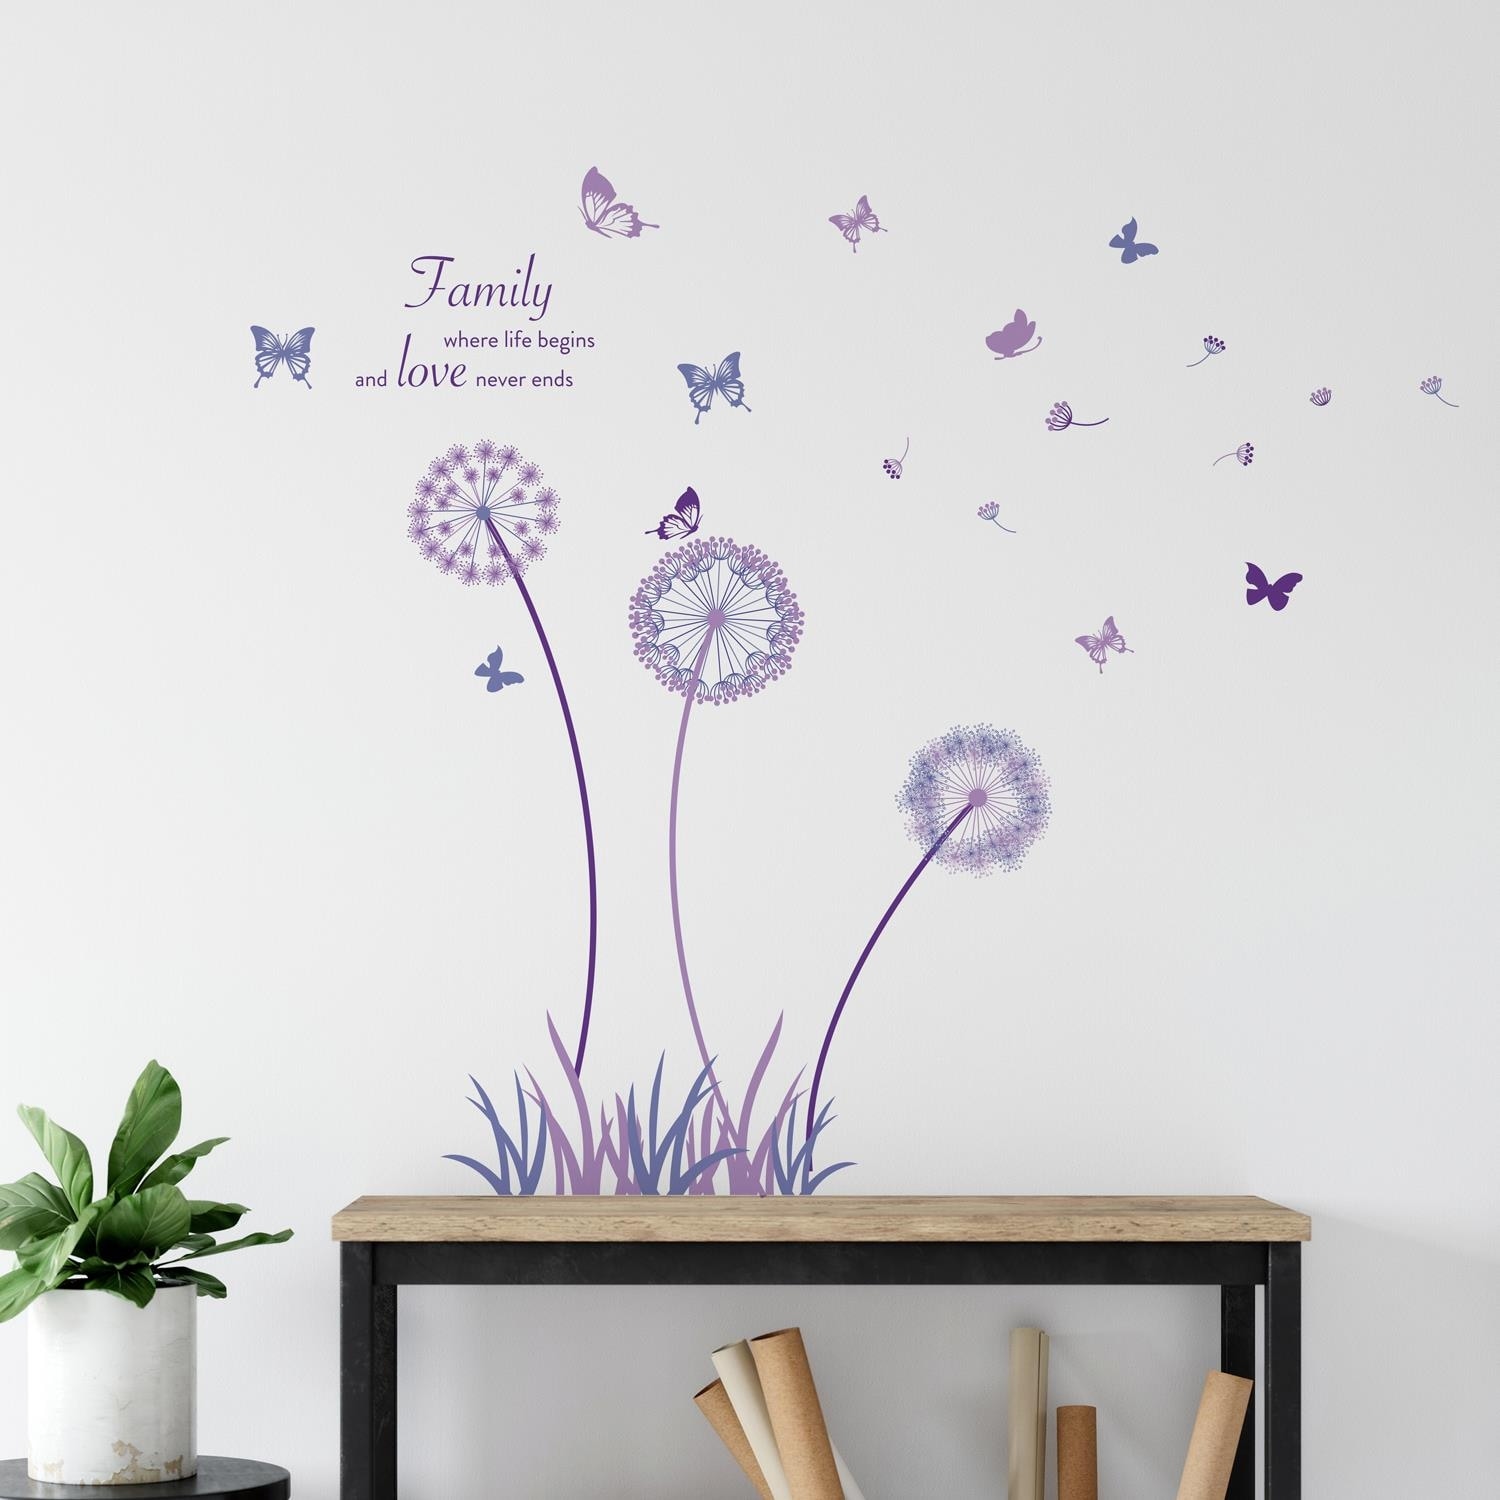 RoomMates Lisa Audit Butterfly Quote Peel and Stick Wall Decals, Blue/Purple/Green